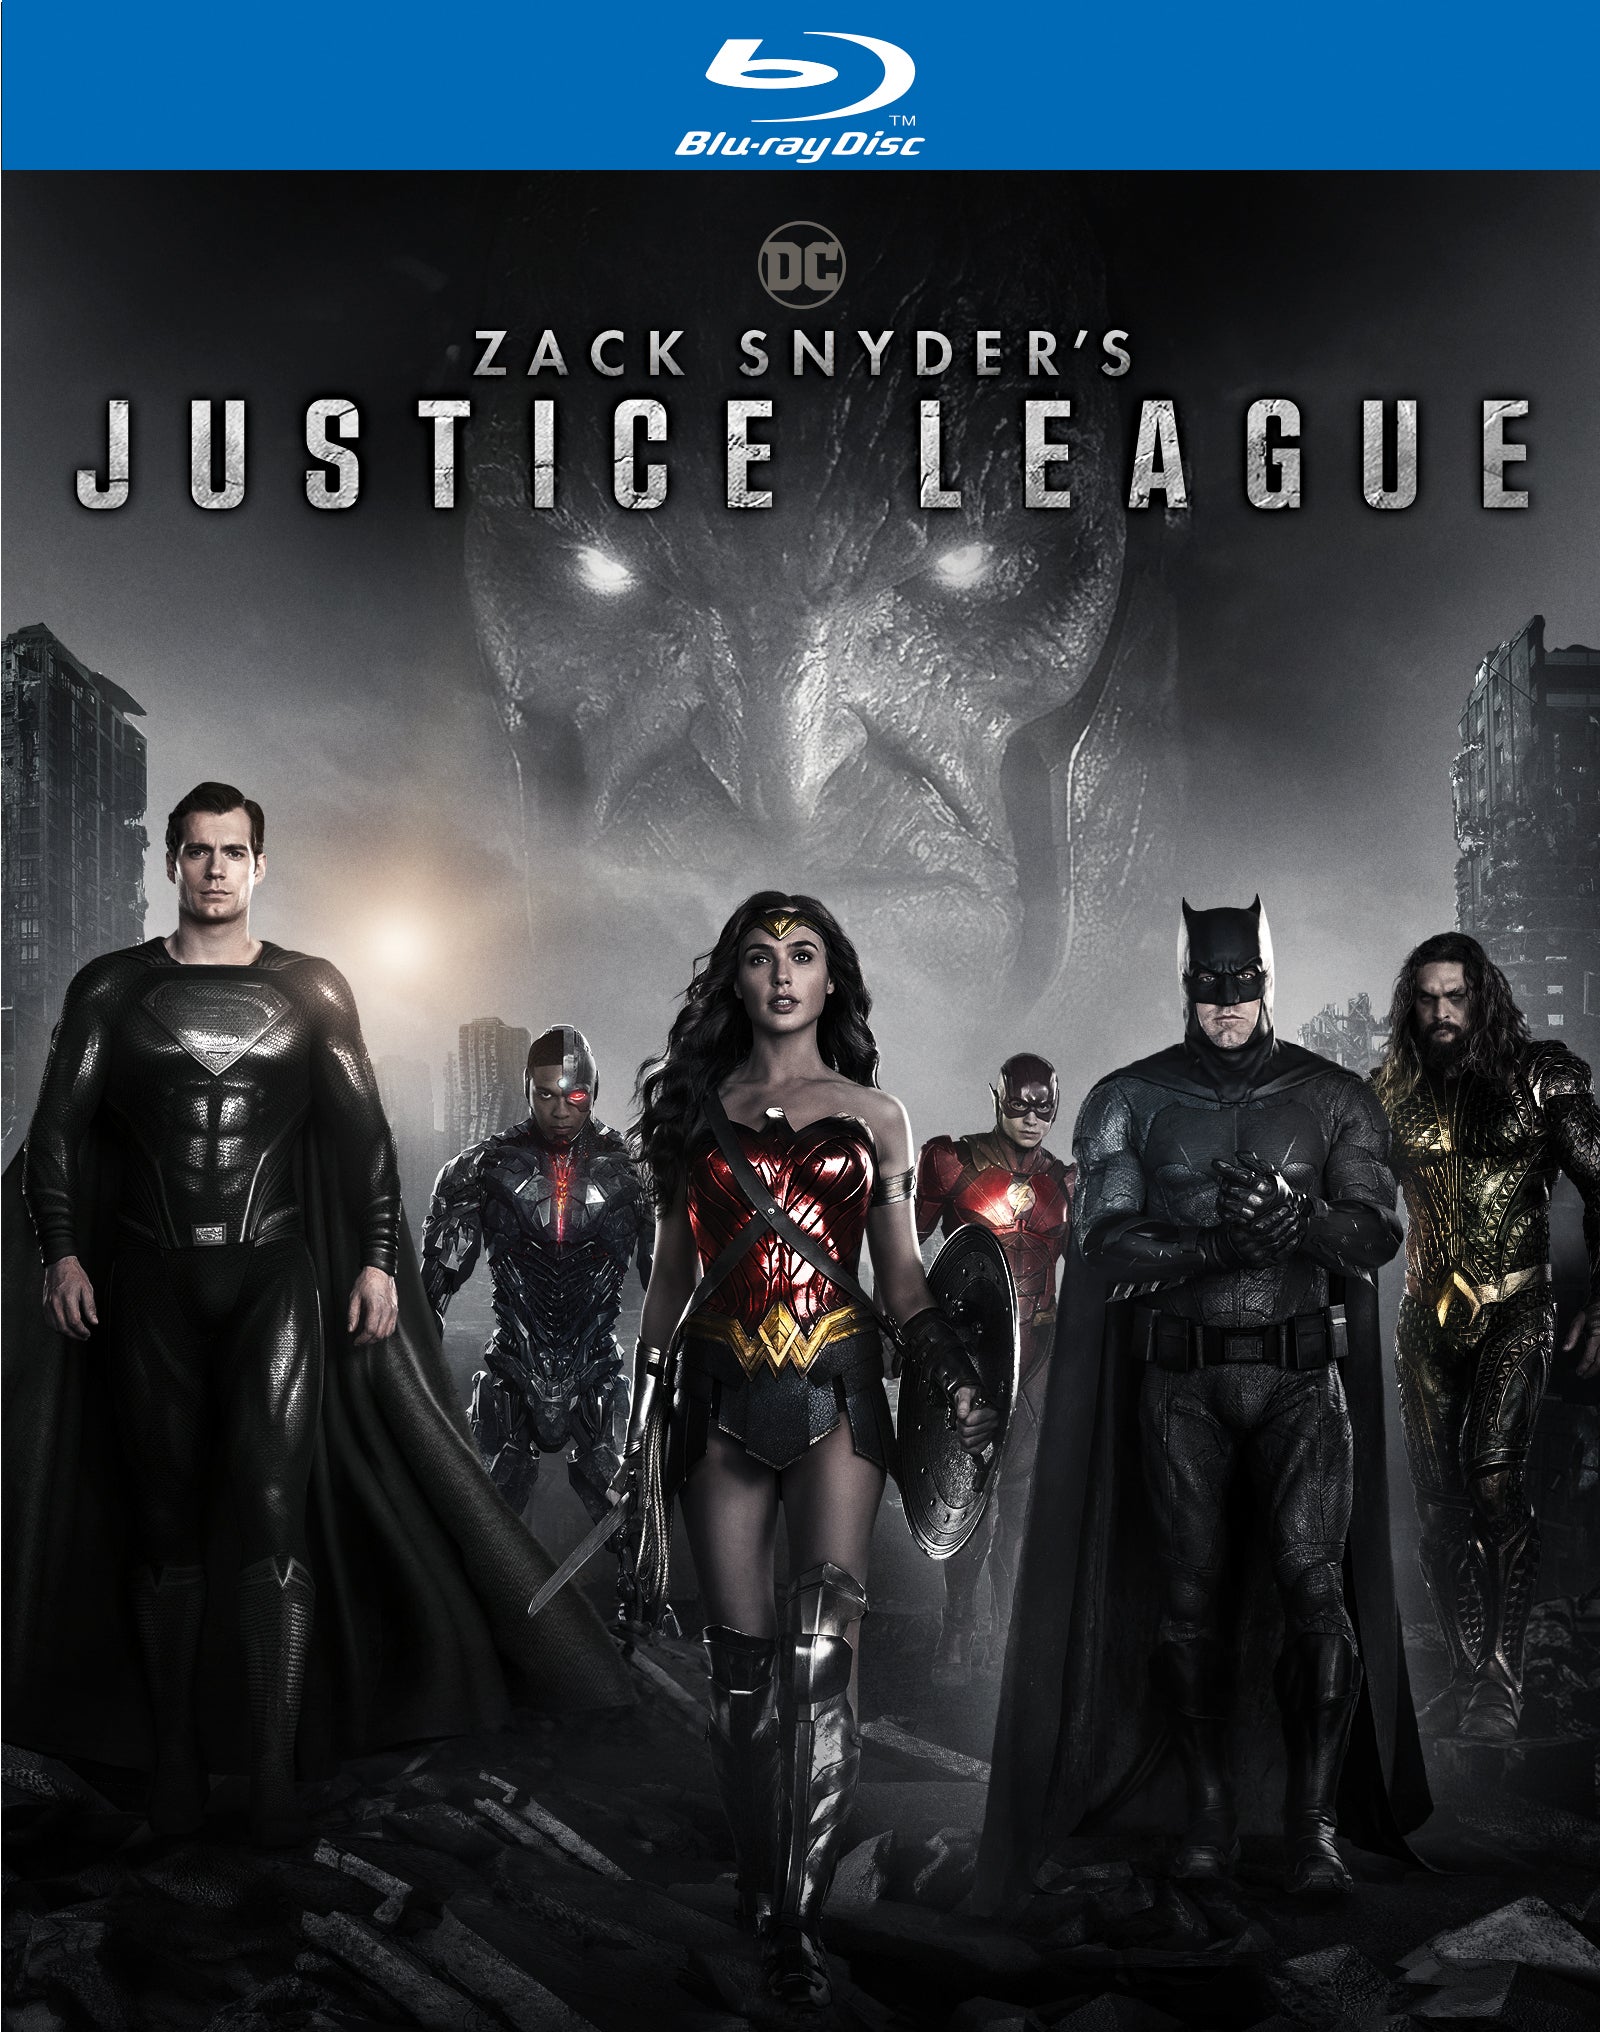 Zack Snyder's Justice League [Blu-ray] cover art